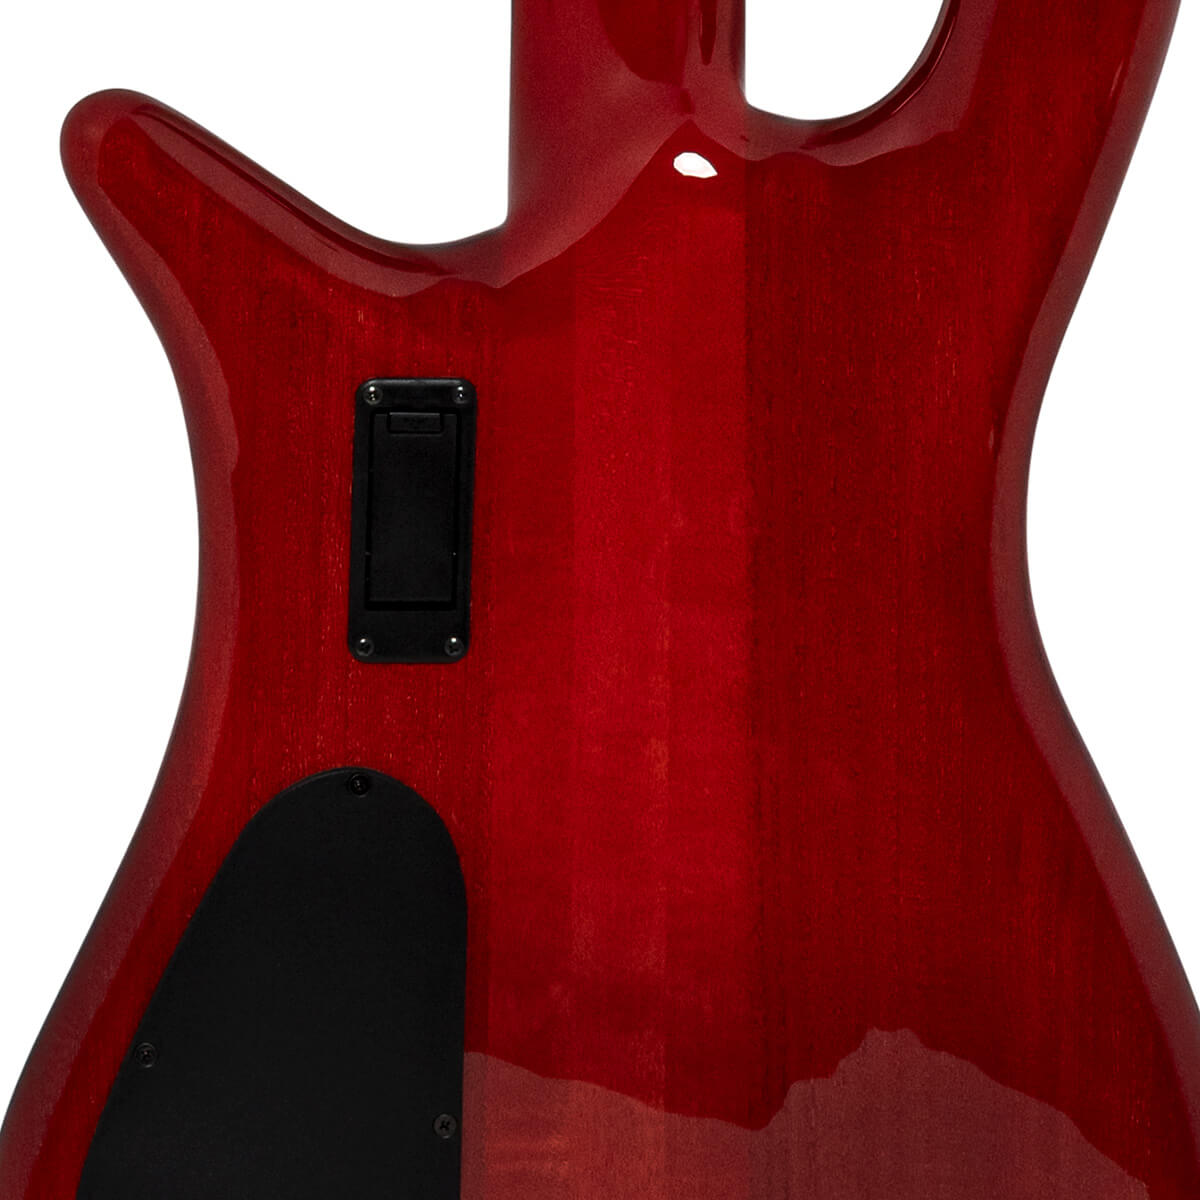 Spector Rudy Sarzo Lt4 Euro Signature Rw - Scarlett Red Gloss - Basse Électrique Solid Body - Variation 3